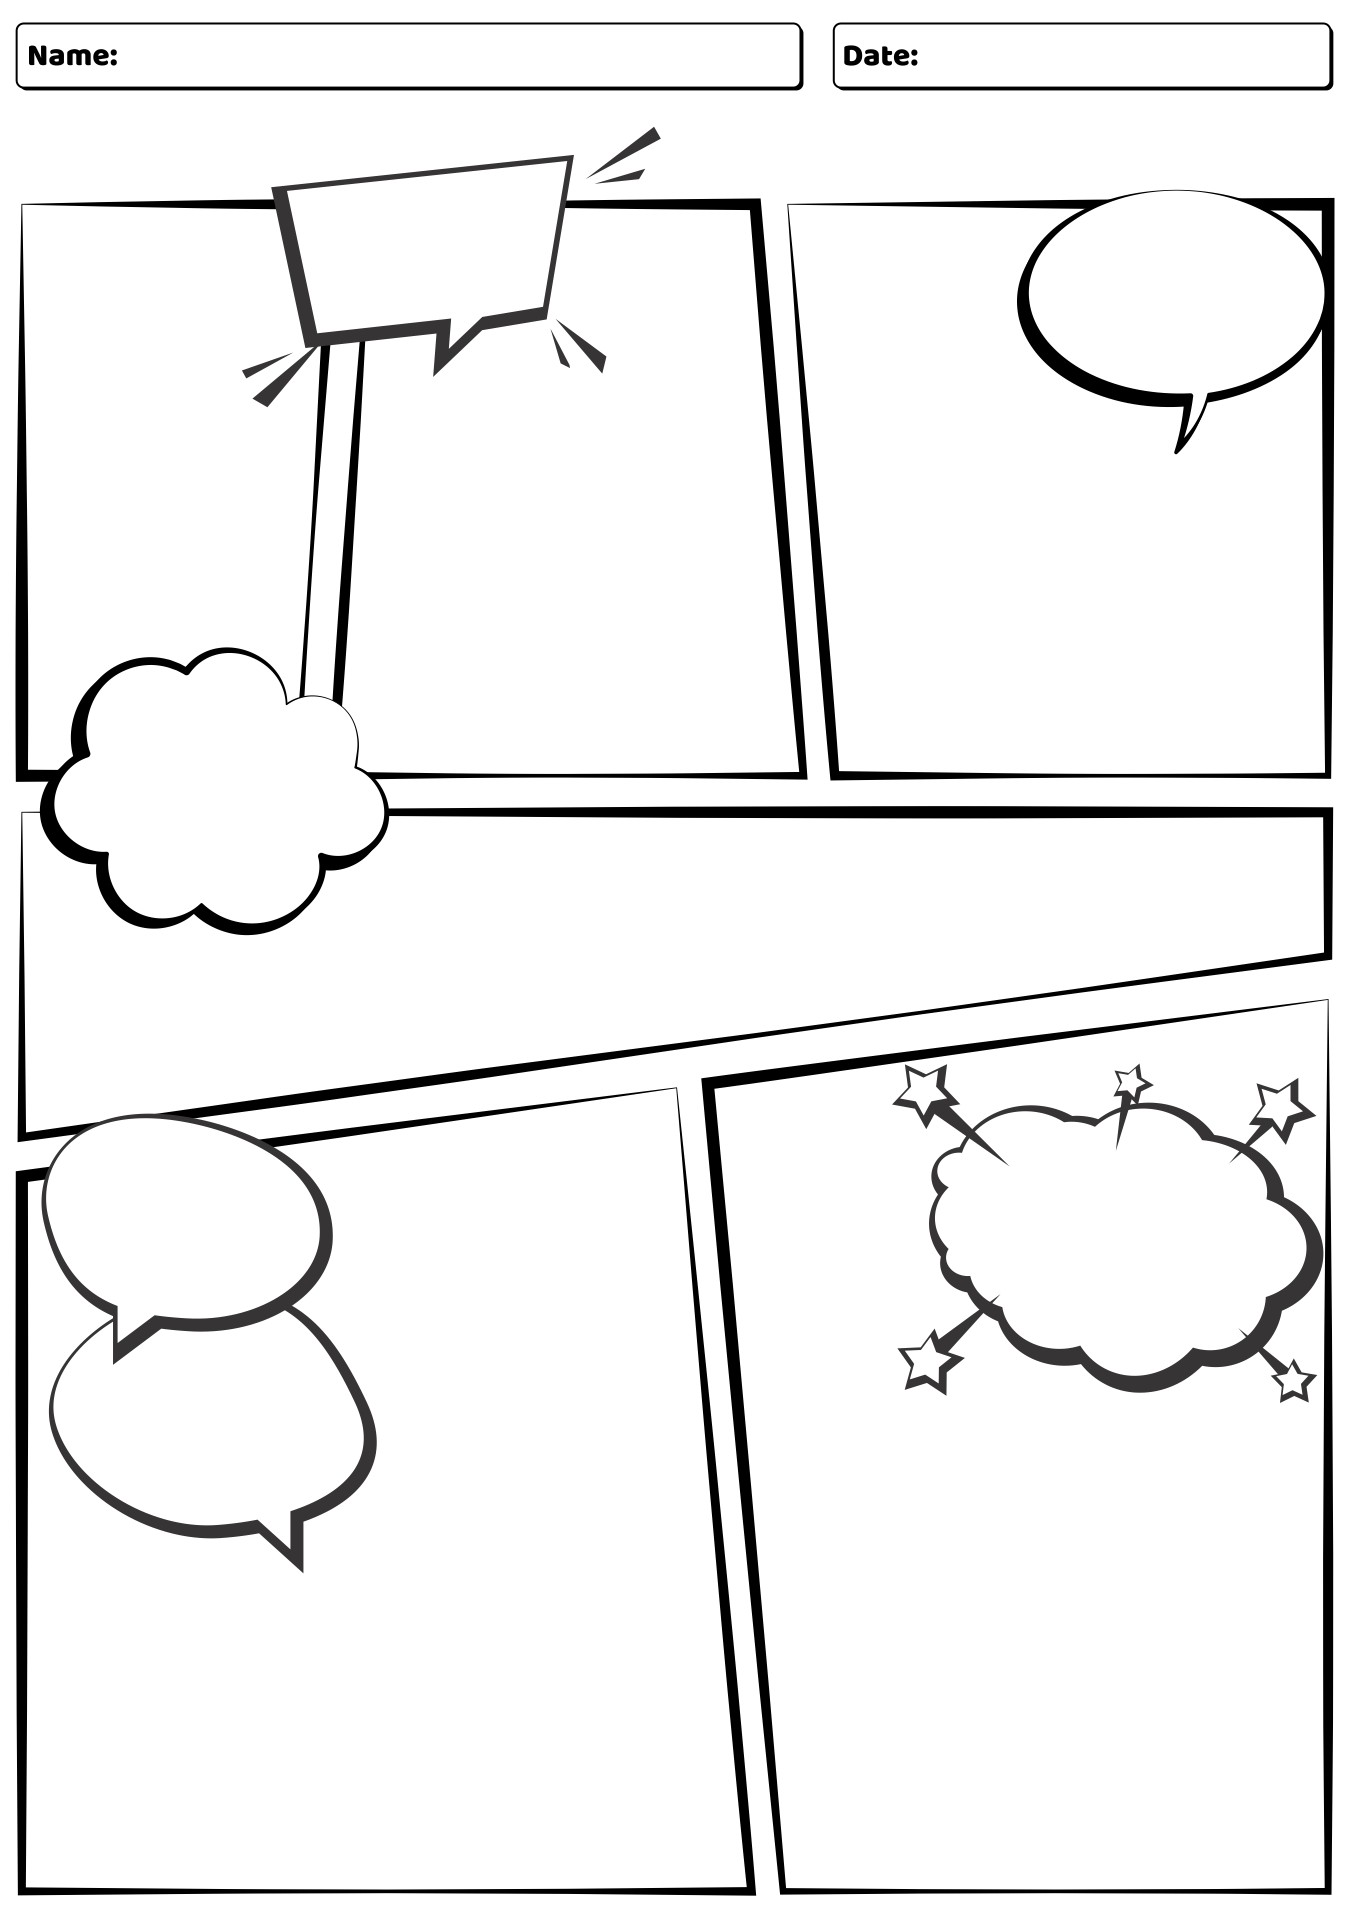 Comic Strips with Blank Bubbles